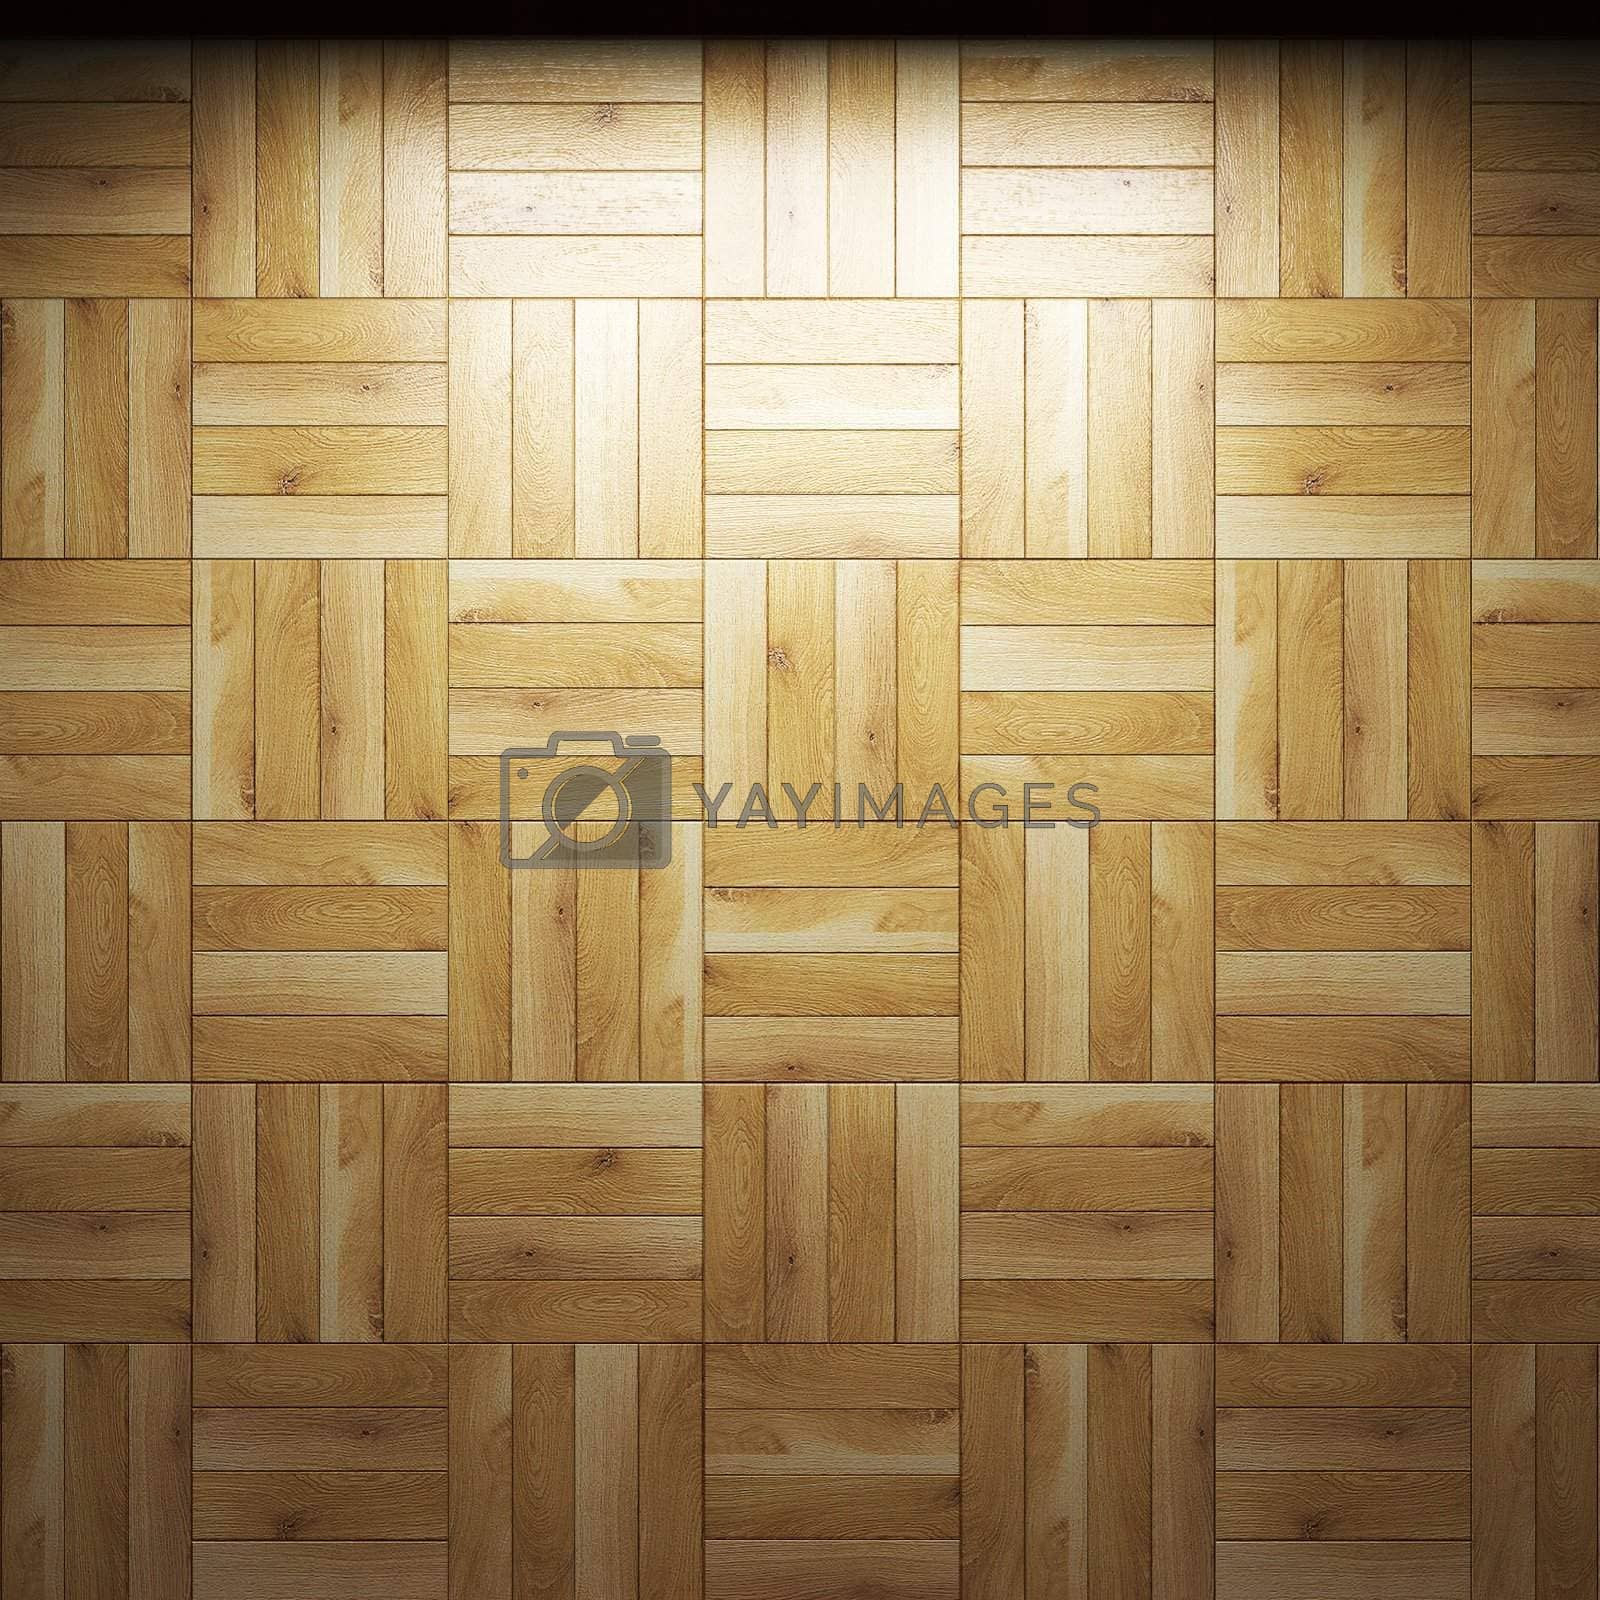 Royalty free image of illuminated wooden wall by icetray